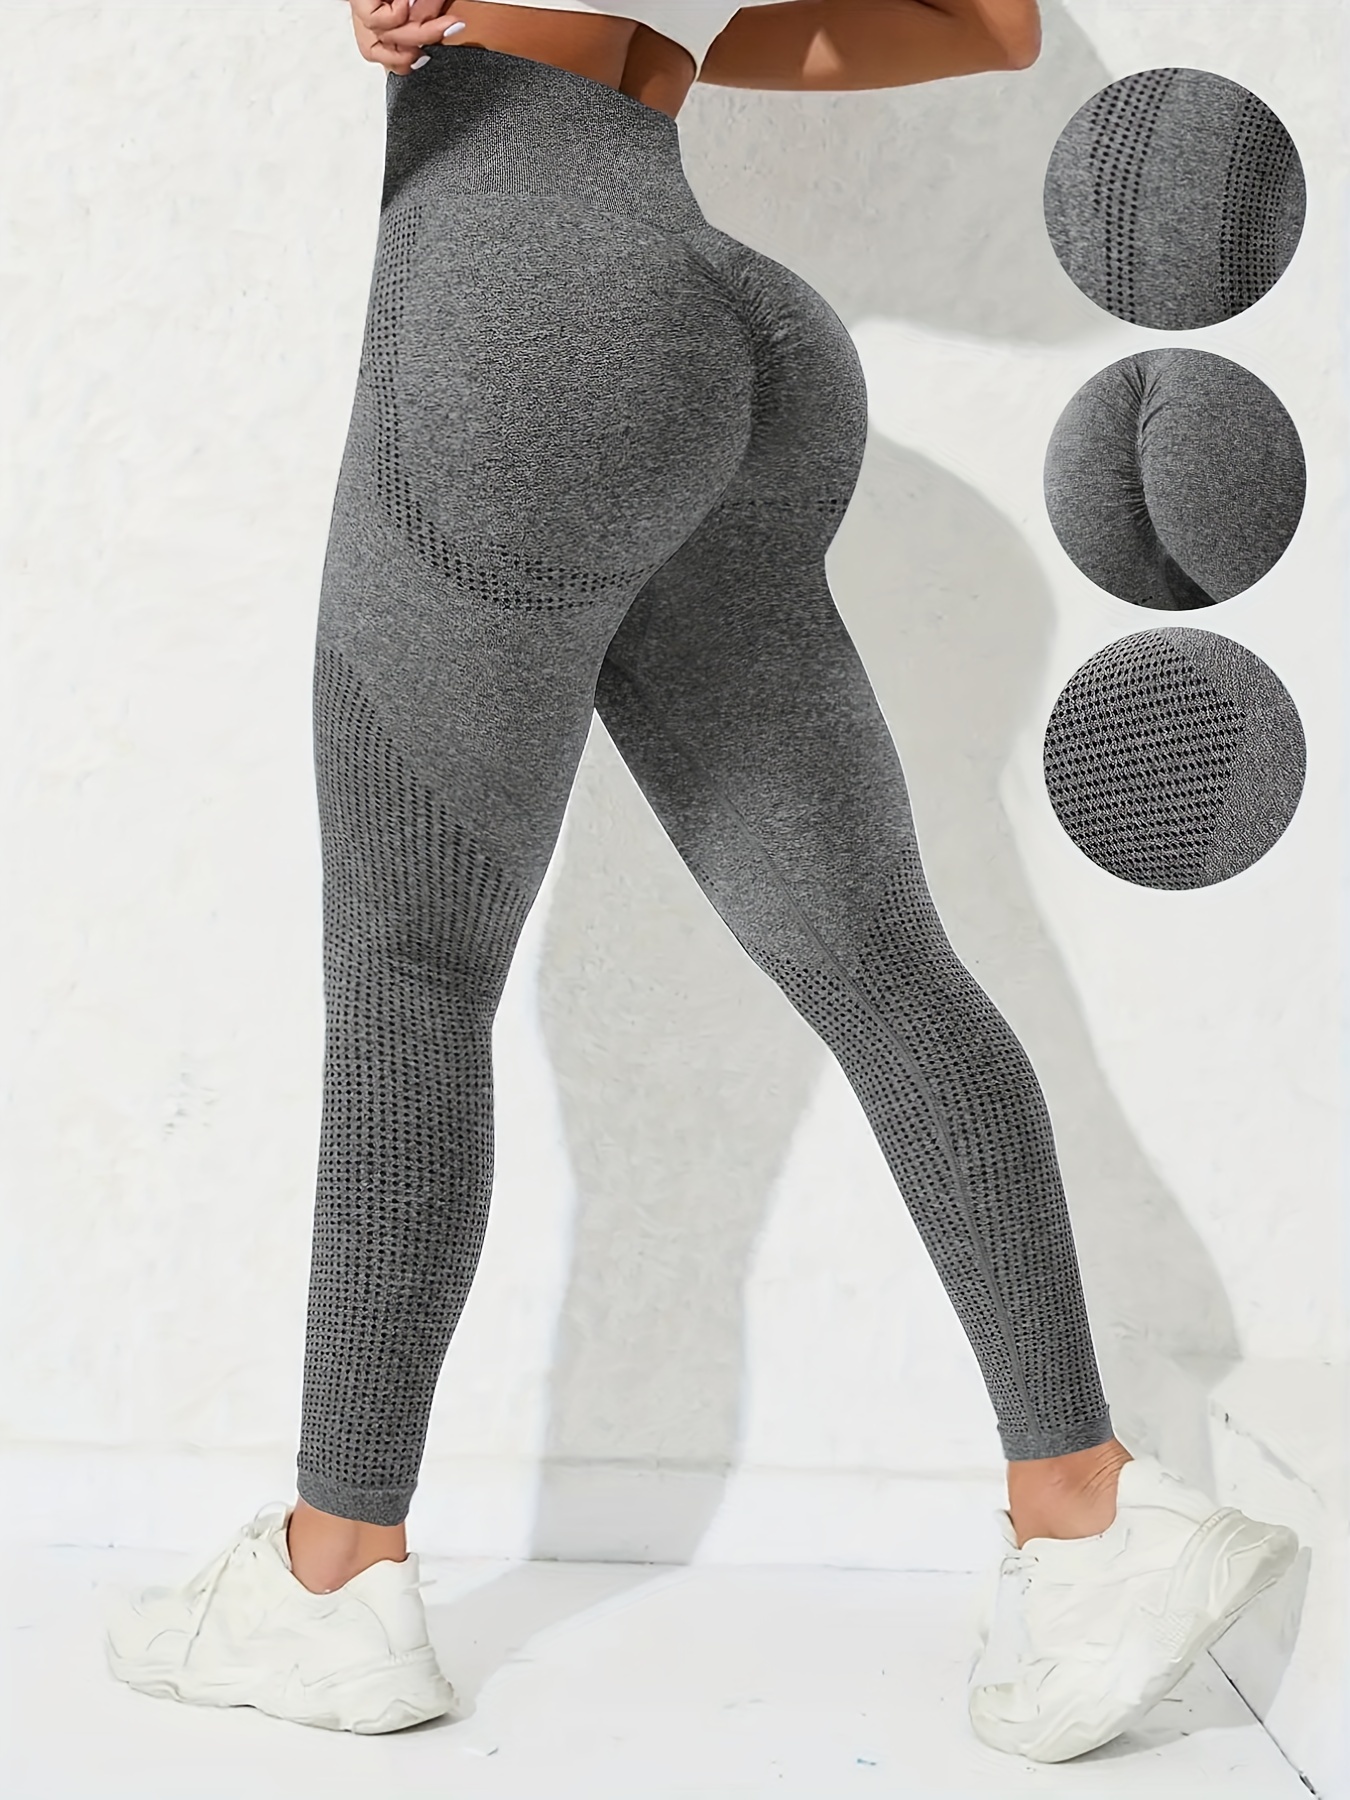 Leggings for Women Plus Size Leggings for Women No See-Through Yoga Pants  Butt Lift High Waisted Yoga Pants (Grey, XS) at  Women's Clothing  store